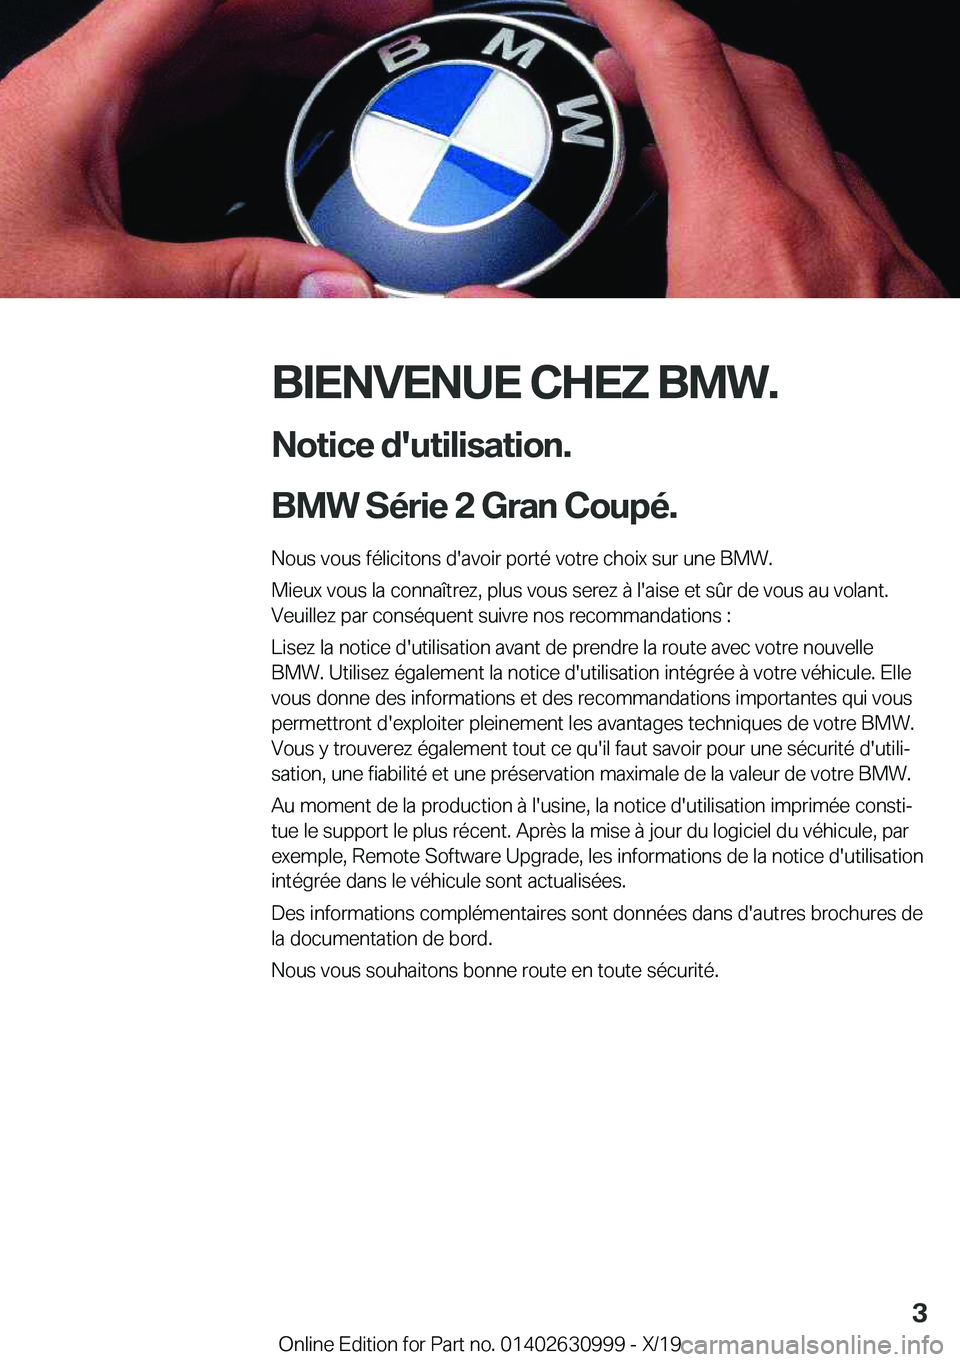 BMW 2 SERIES GRAN COUPE 2020  Notices Demploi (in French) �B�I�E�N�V�E�N�U�E��C�H�E�Z��B�M�W�.�N�o�t�i�c�e��d�'�u�t�i�l�i�s�a�t�i�o�n�.
�B�M�W��S�é�r�i�e��2��G�r�a�n��C�o�u�p�é�.
�N�o�u�s��v�o�u�s��f�é�l�i�c�i�t�o�n�s��d�'�a�v�o�i�r��p�